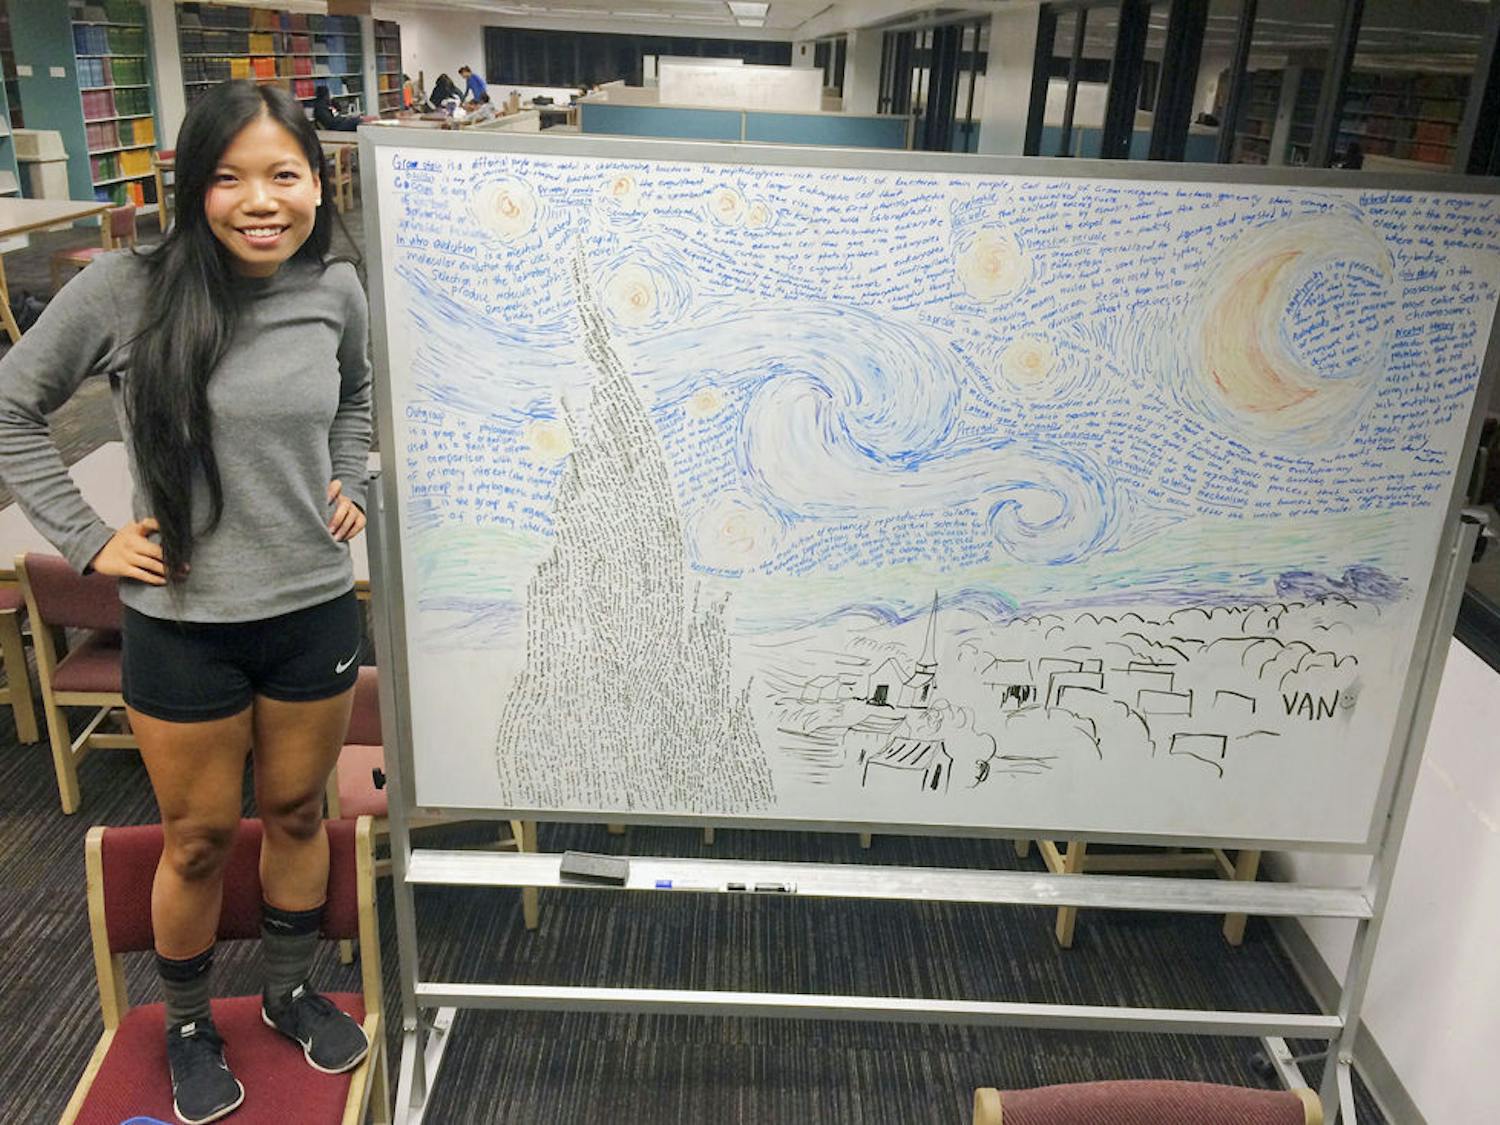 Van Truong, a 19-year-old anthropology sophomore, poses next to the “Starry Night” art piece she made on a whiteboard with her biology notes. Truong is applying for a grant within the Bob Graham Center for Public Service to bring the arts and sciences together.